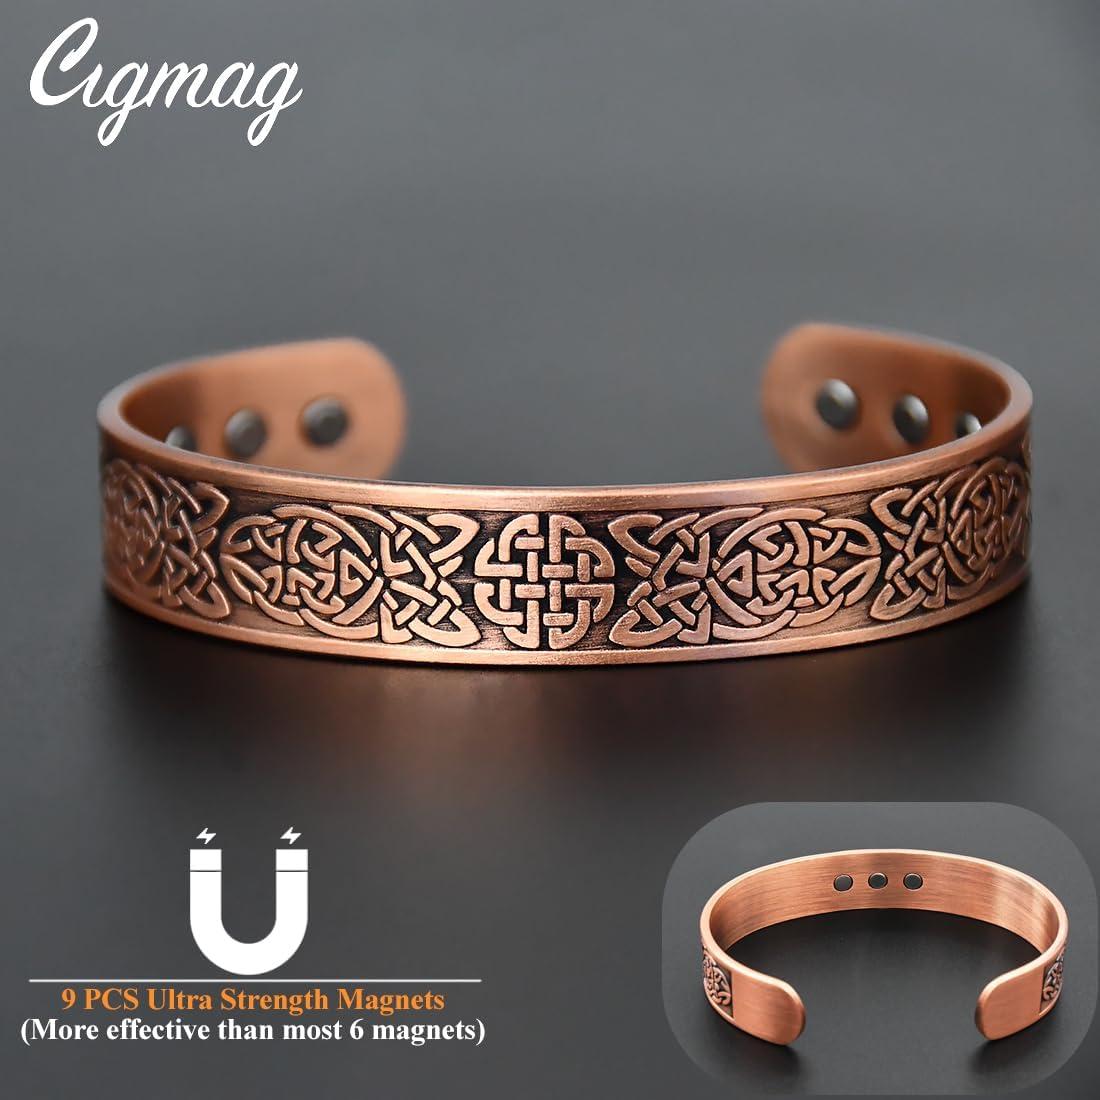 Magnetic Therapy bracelets, Wristbands & Jewellery - Trion:Z